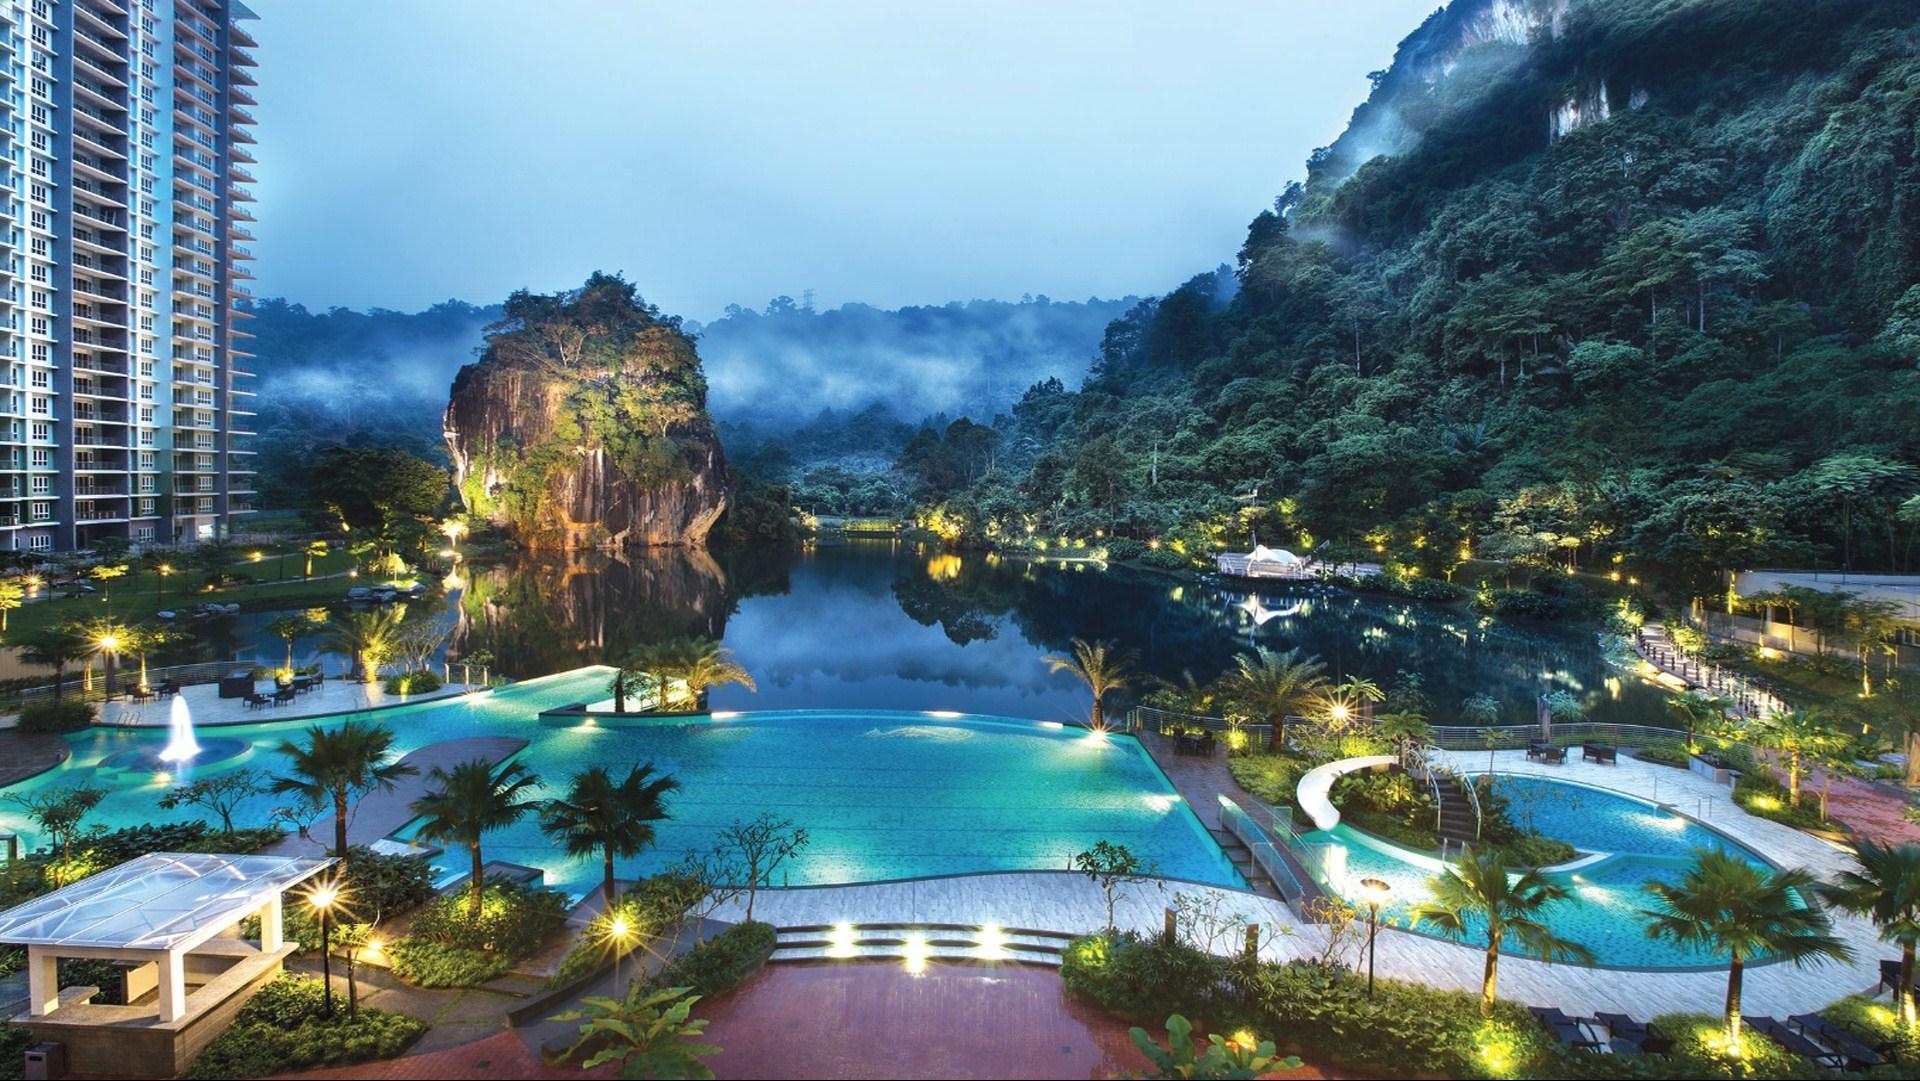 The Haven Resort Hotel in Ipoh, MY